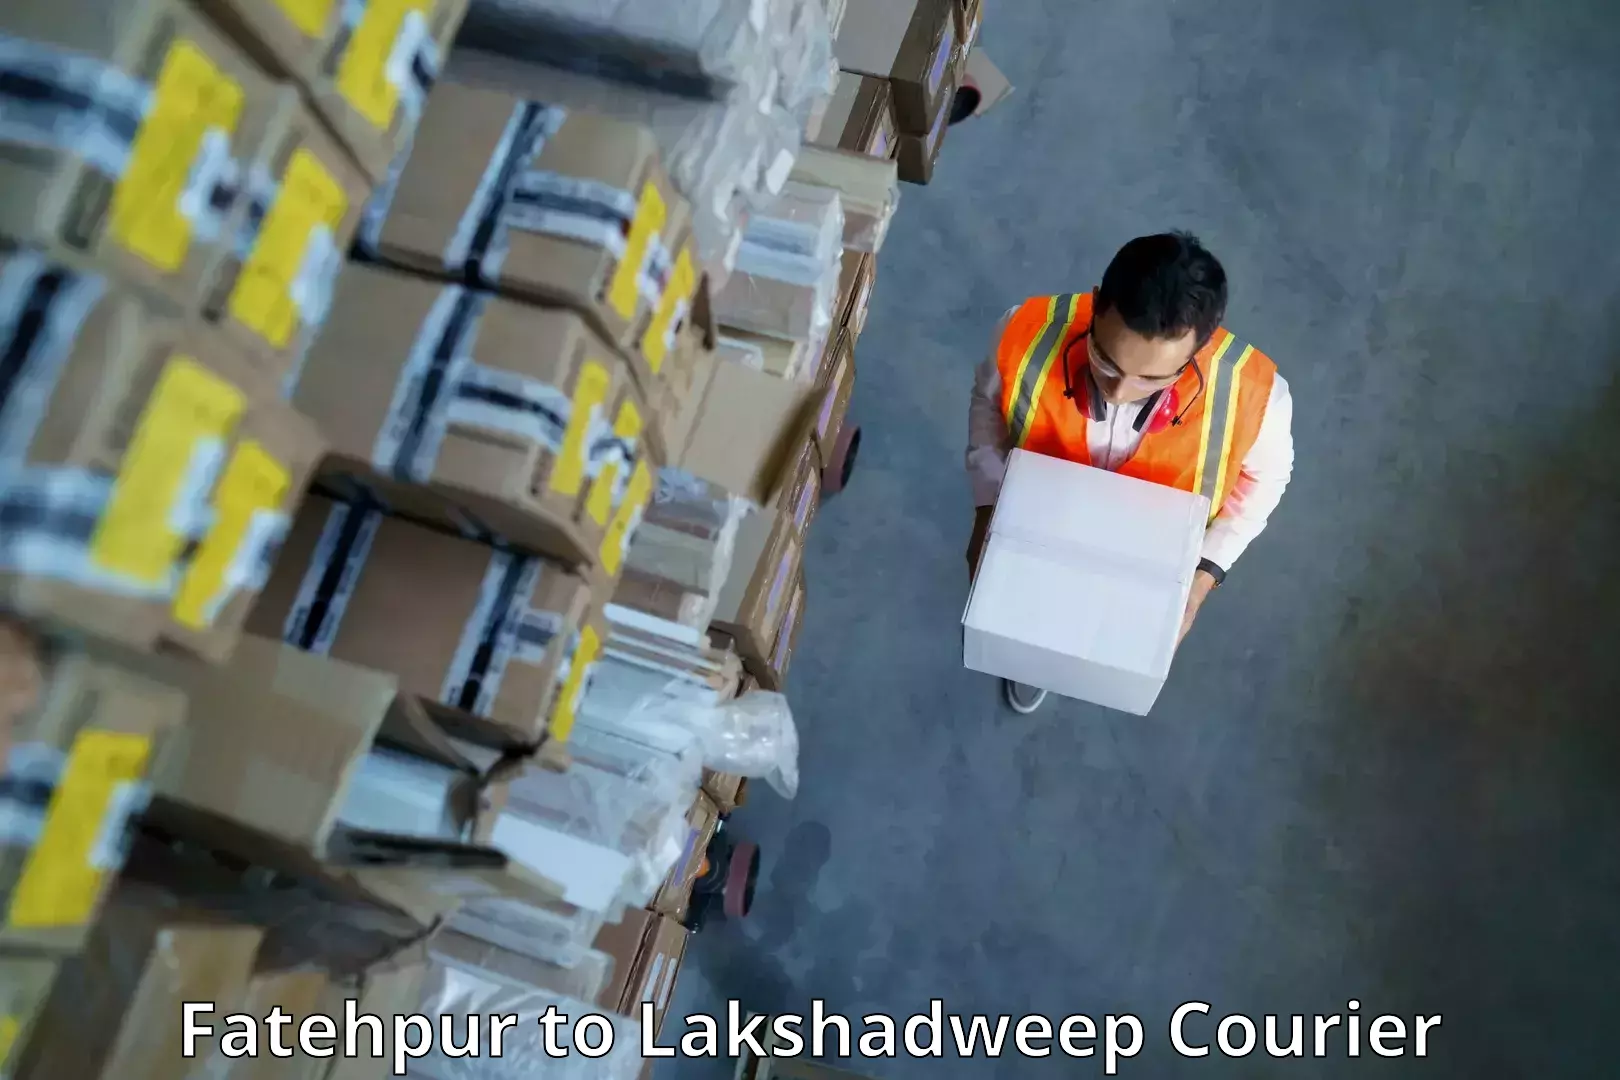 Cash on delivery service Fatehpur to Lakshadweep